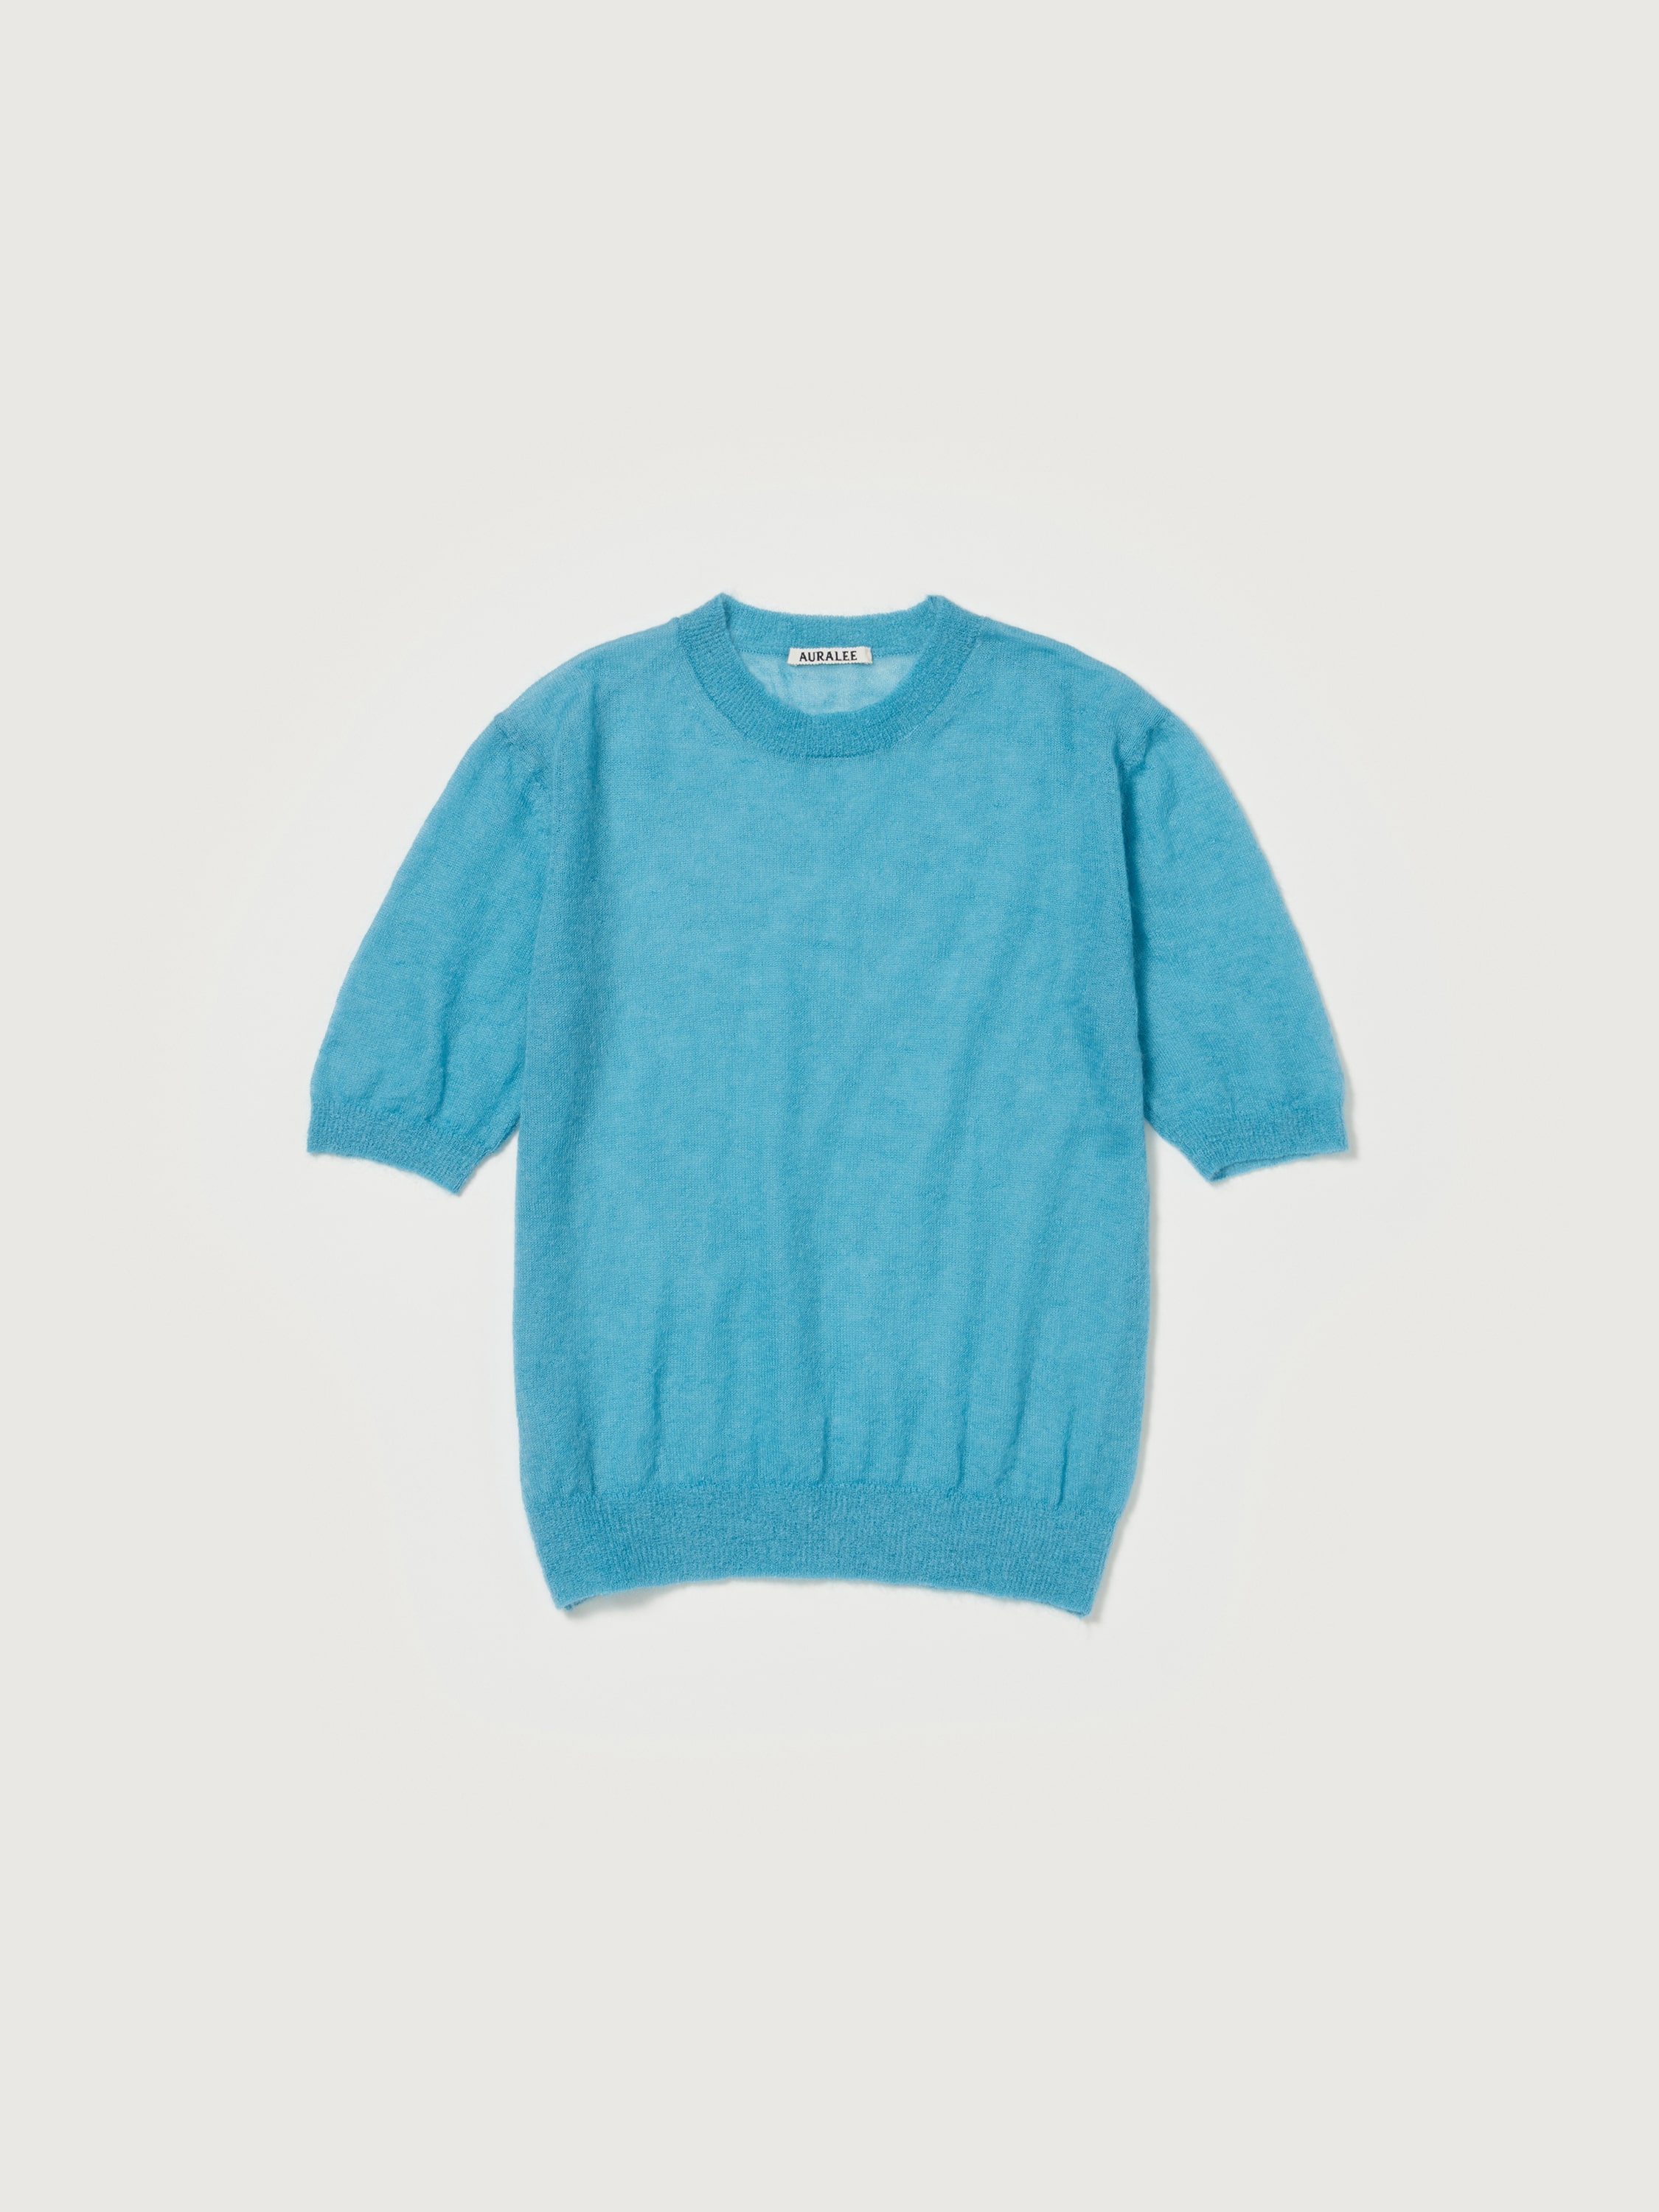 KID MOHAIR SHEER KNIT TEE 詳細画像 TURQUOISE BLUE 1